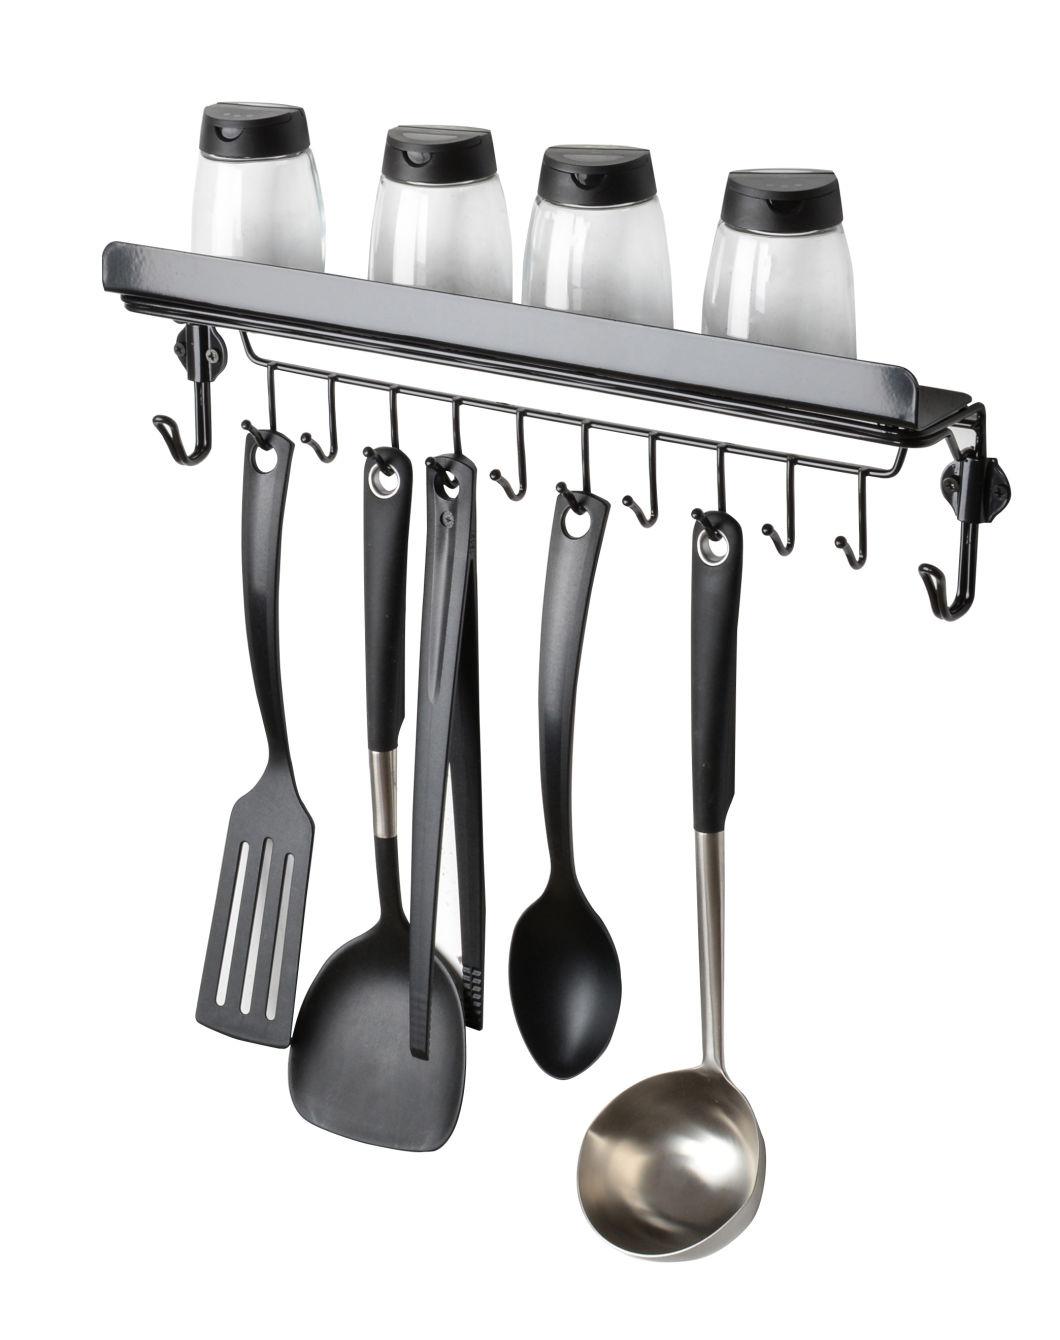 Wall Hanging Utensils Pot Pan Lid Cookware Organization Spice Rack with Hooks Storage Holders